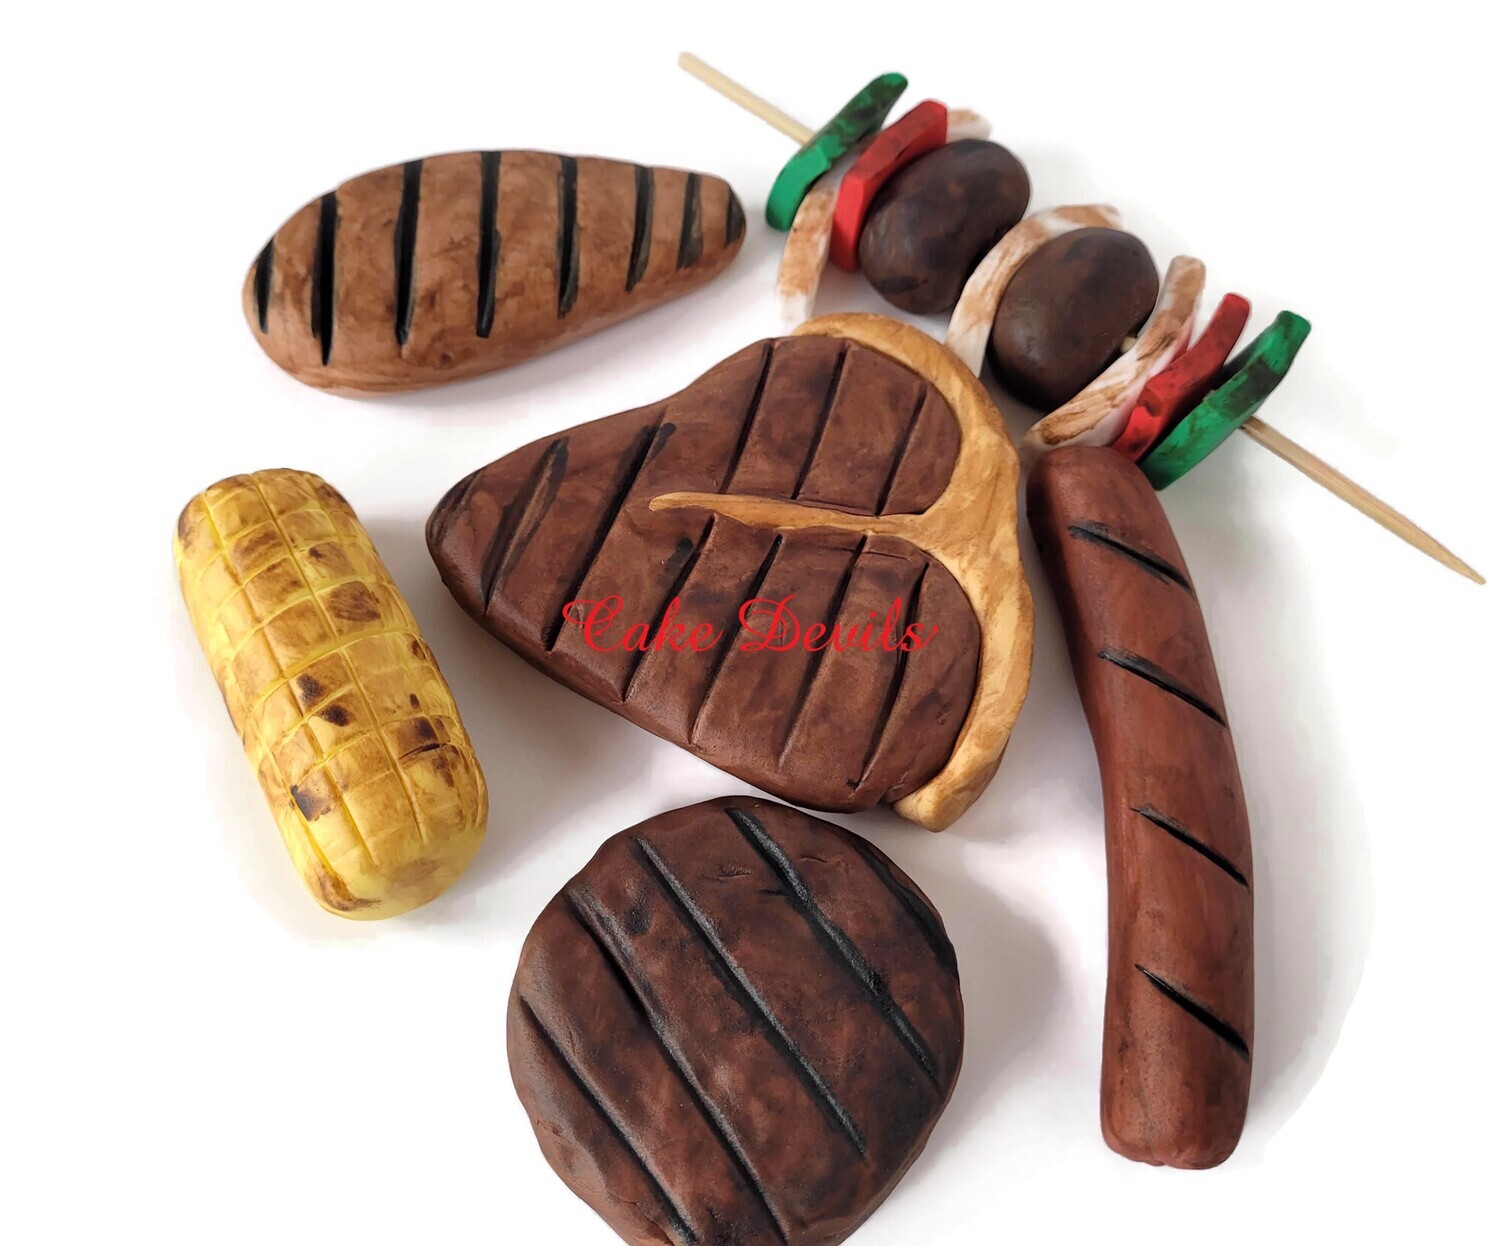 BBQ Grill Food Cake Toppers, Fondant Barbecue cake Decorations- great for Father's Day!